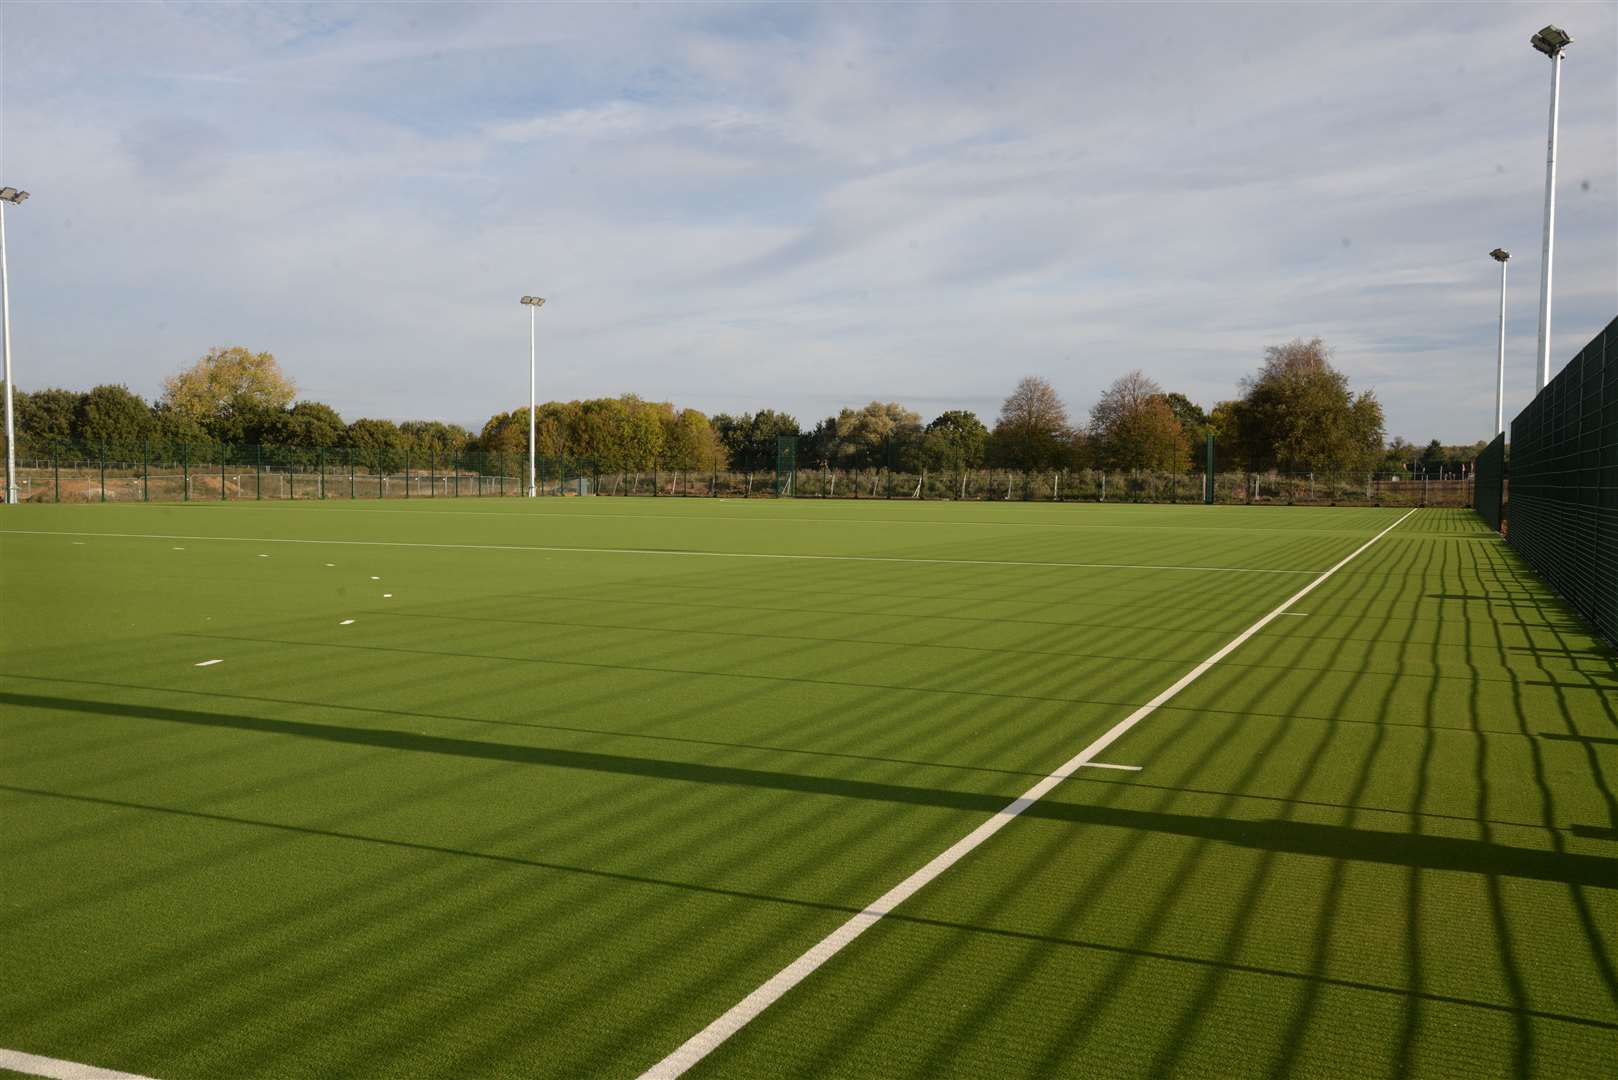 One of the state-of-the-art pitches at the sports hub in Herne Bay